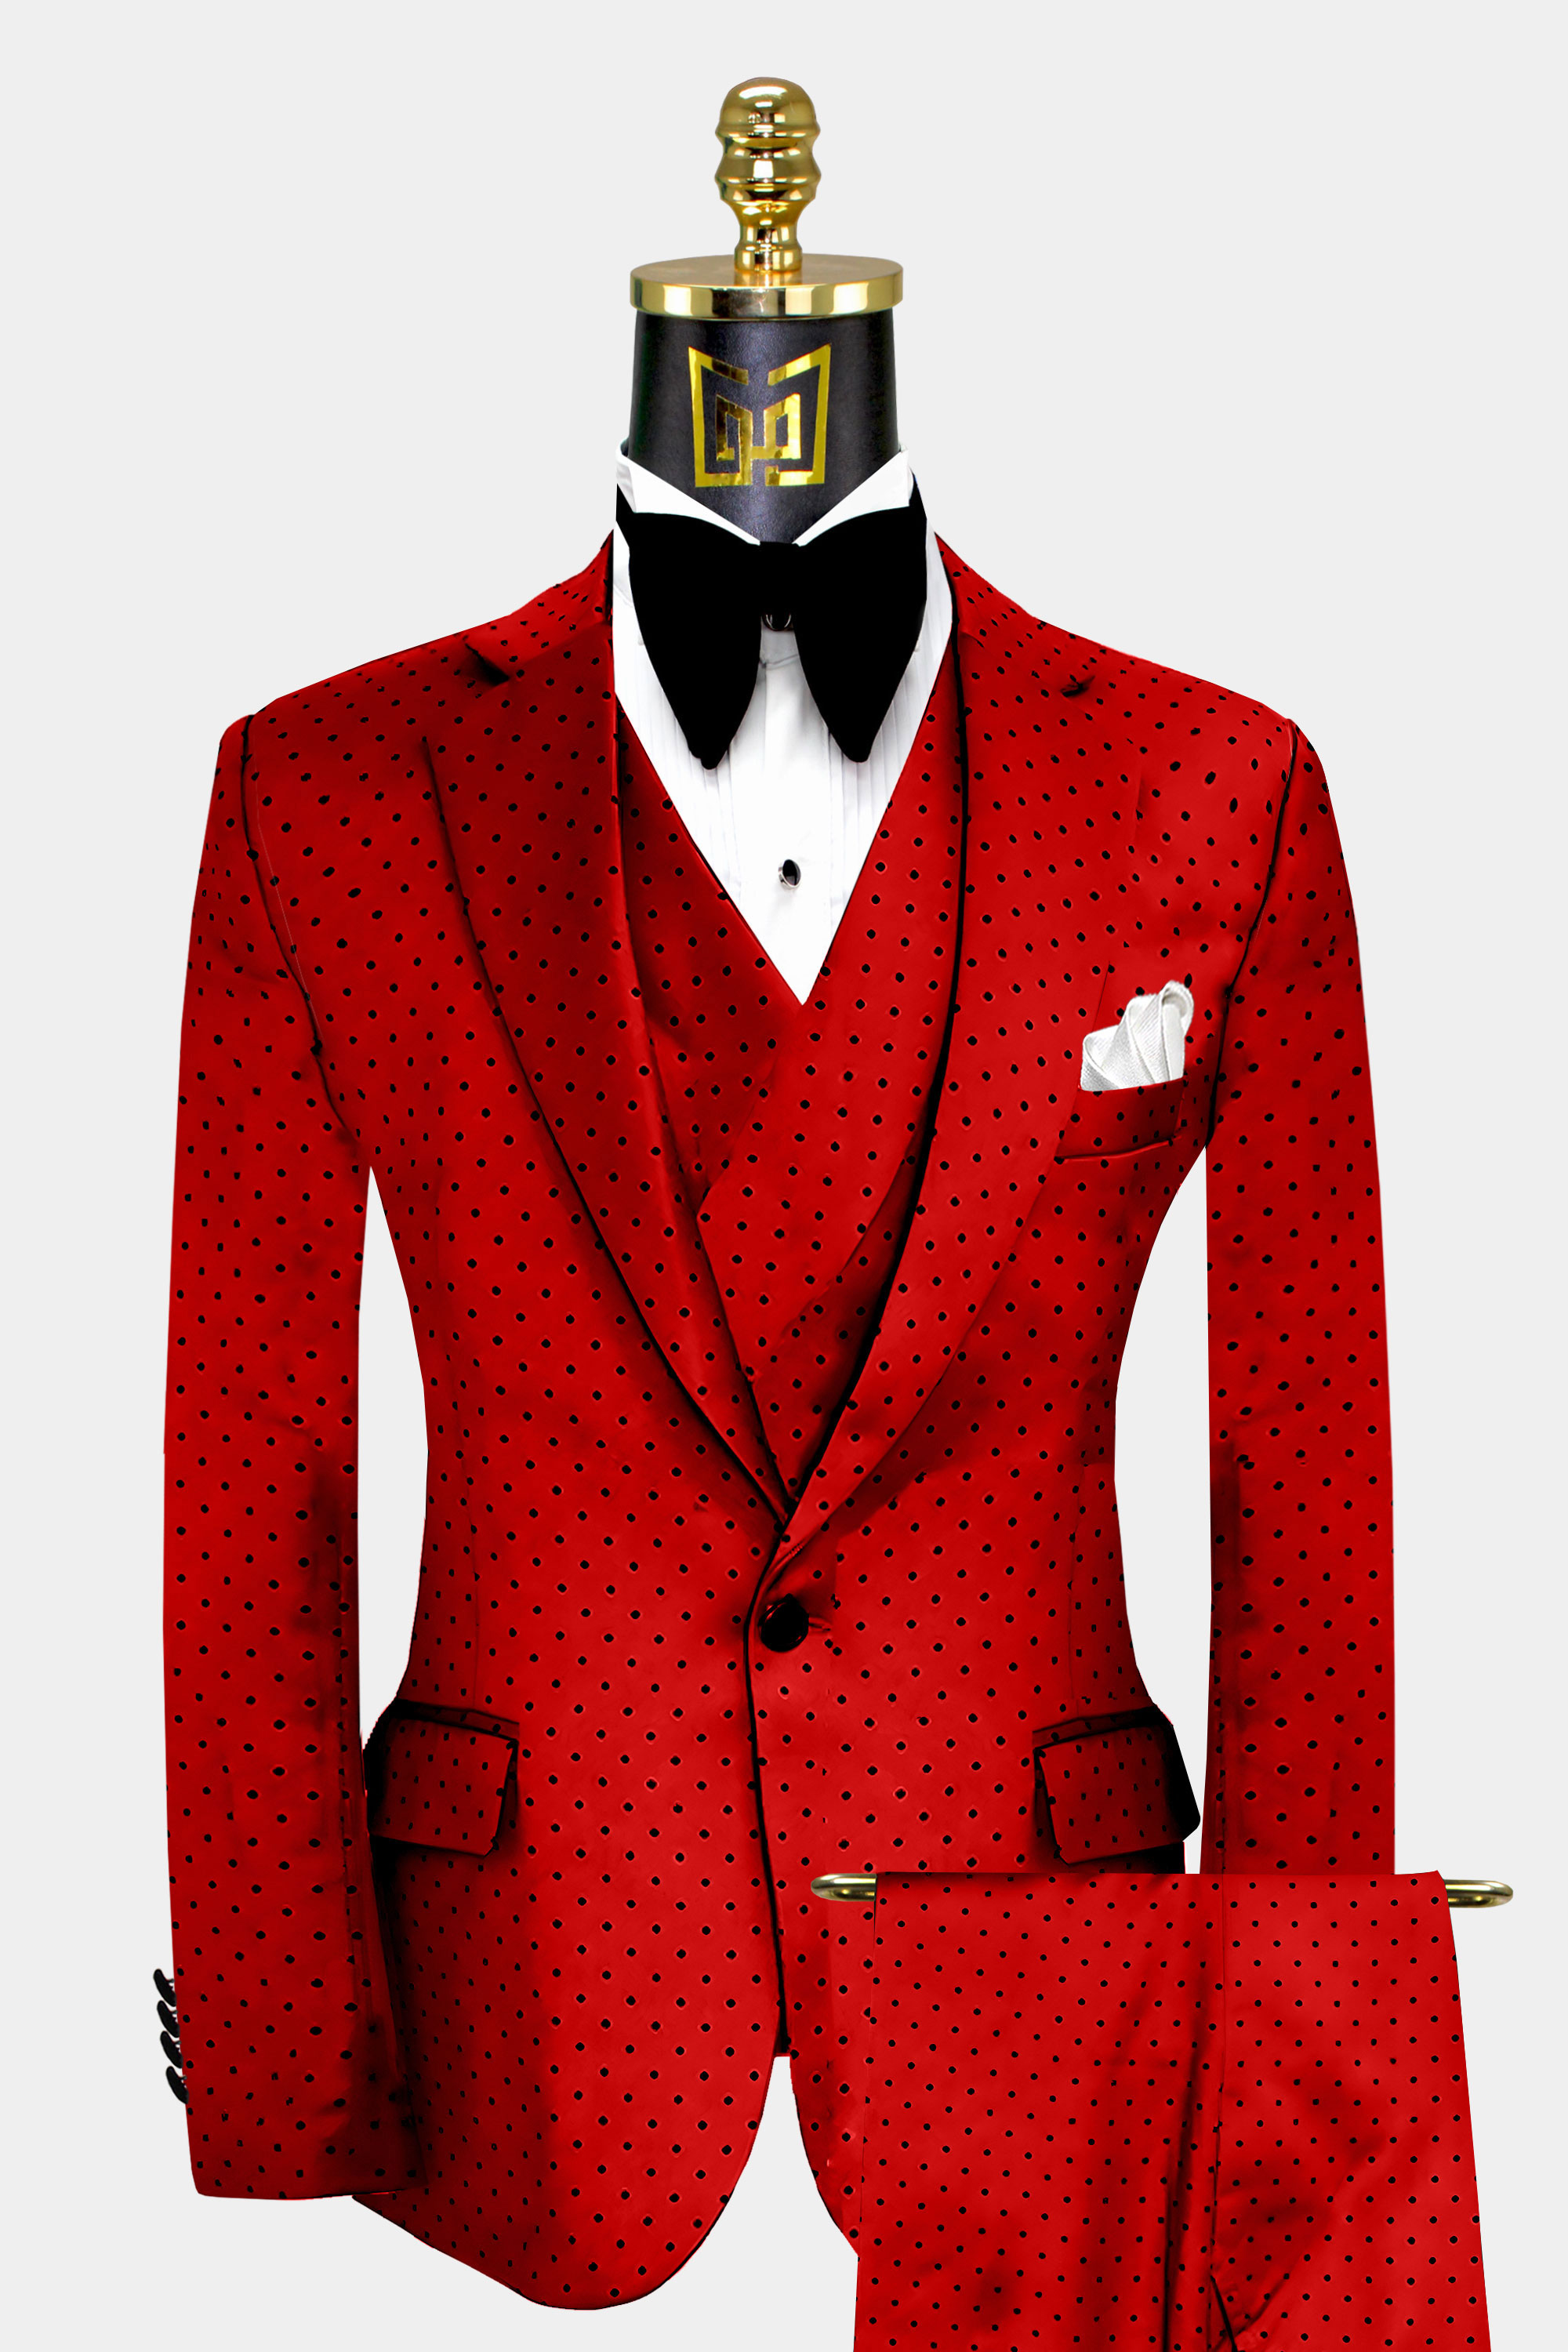 Chic Red Polka Dot Suit - 3 Piece